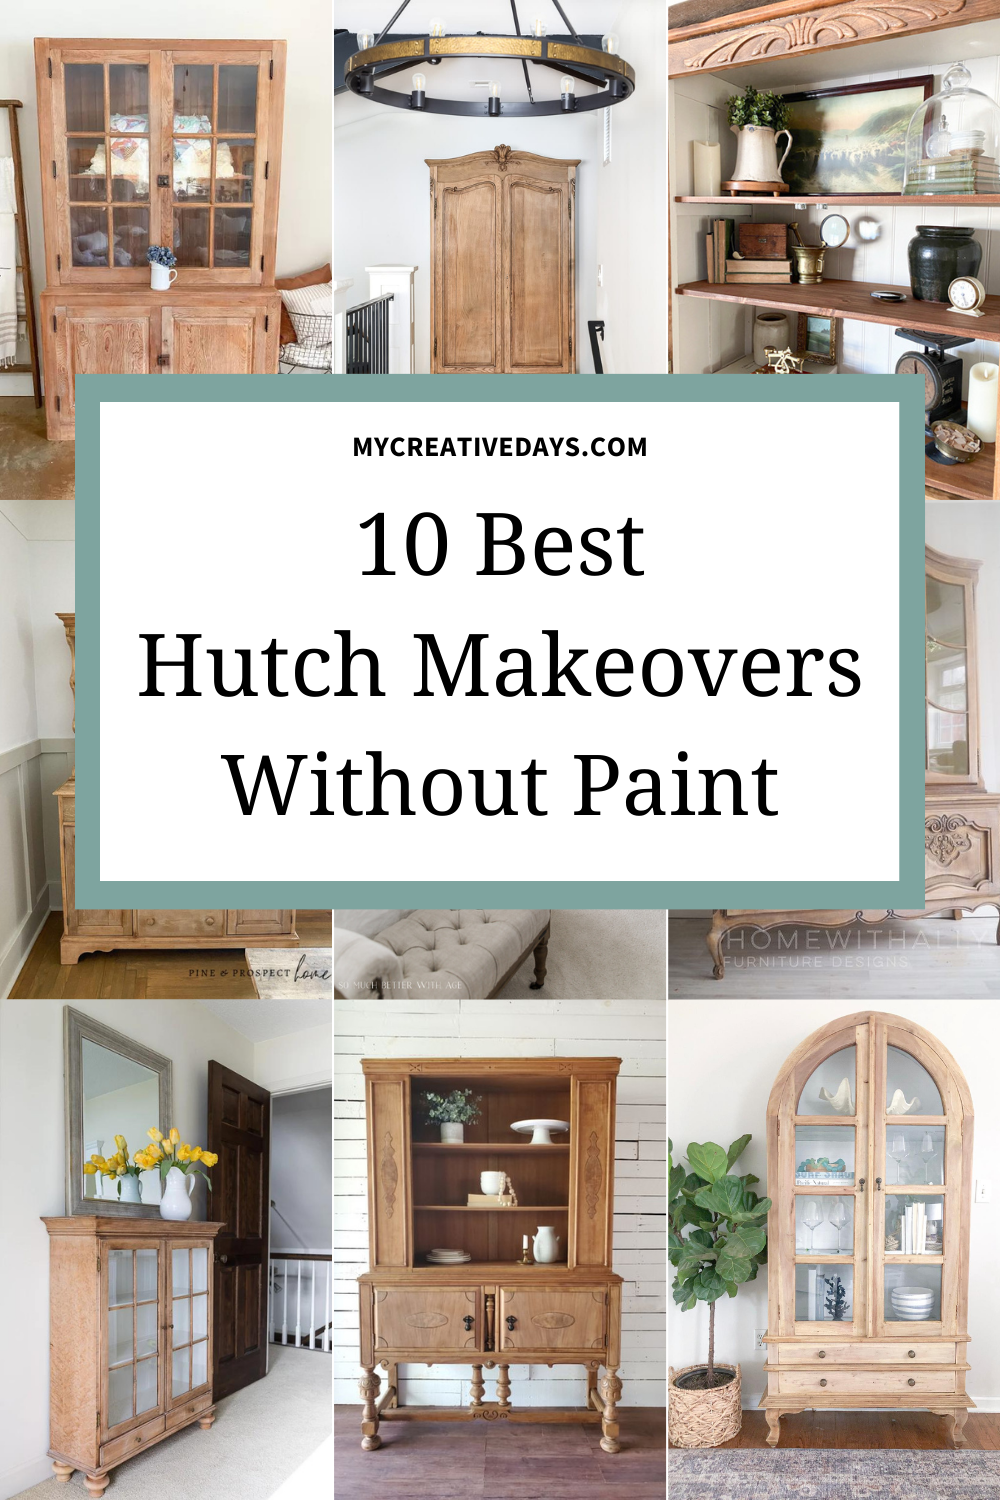 10 Best Hutch Makeovers Without Paint